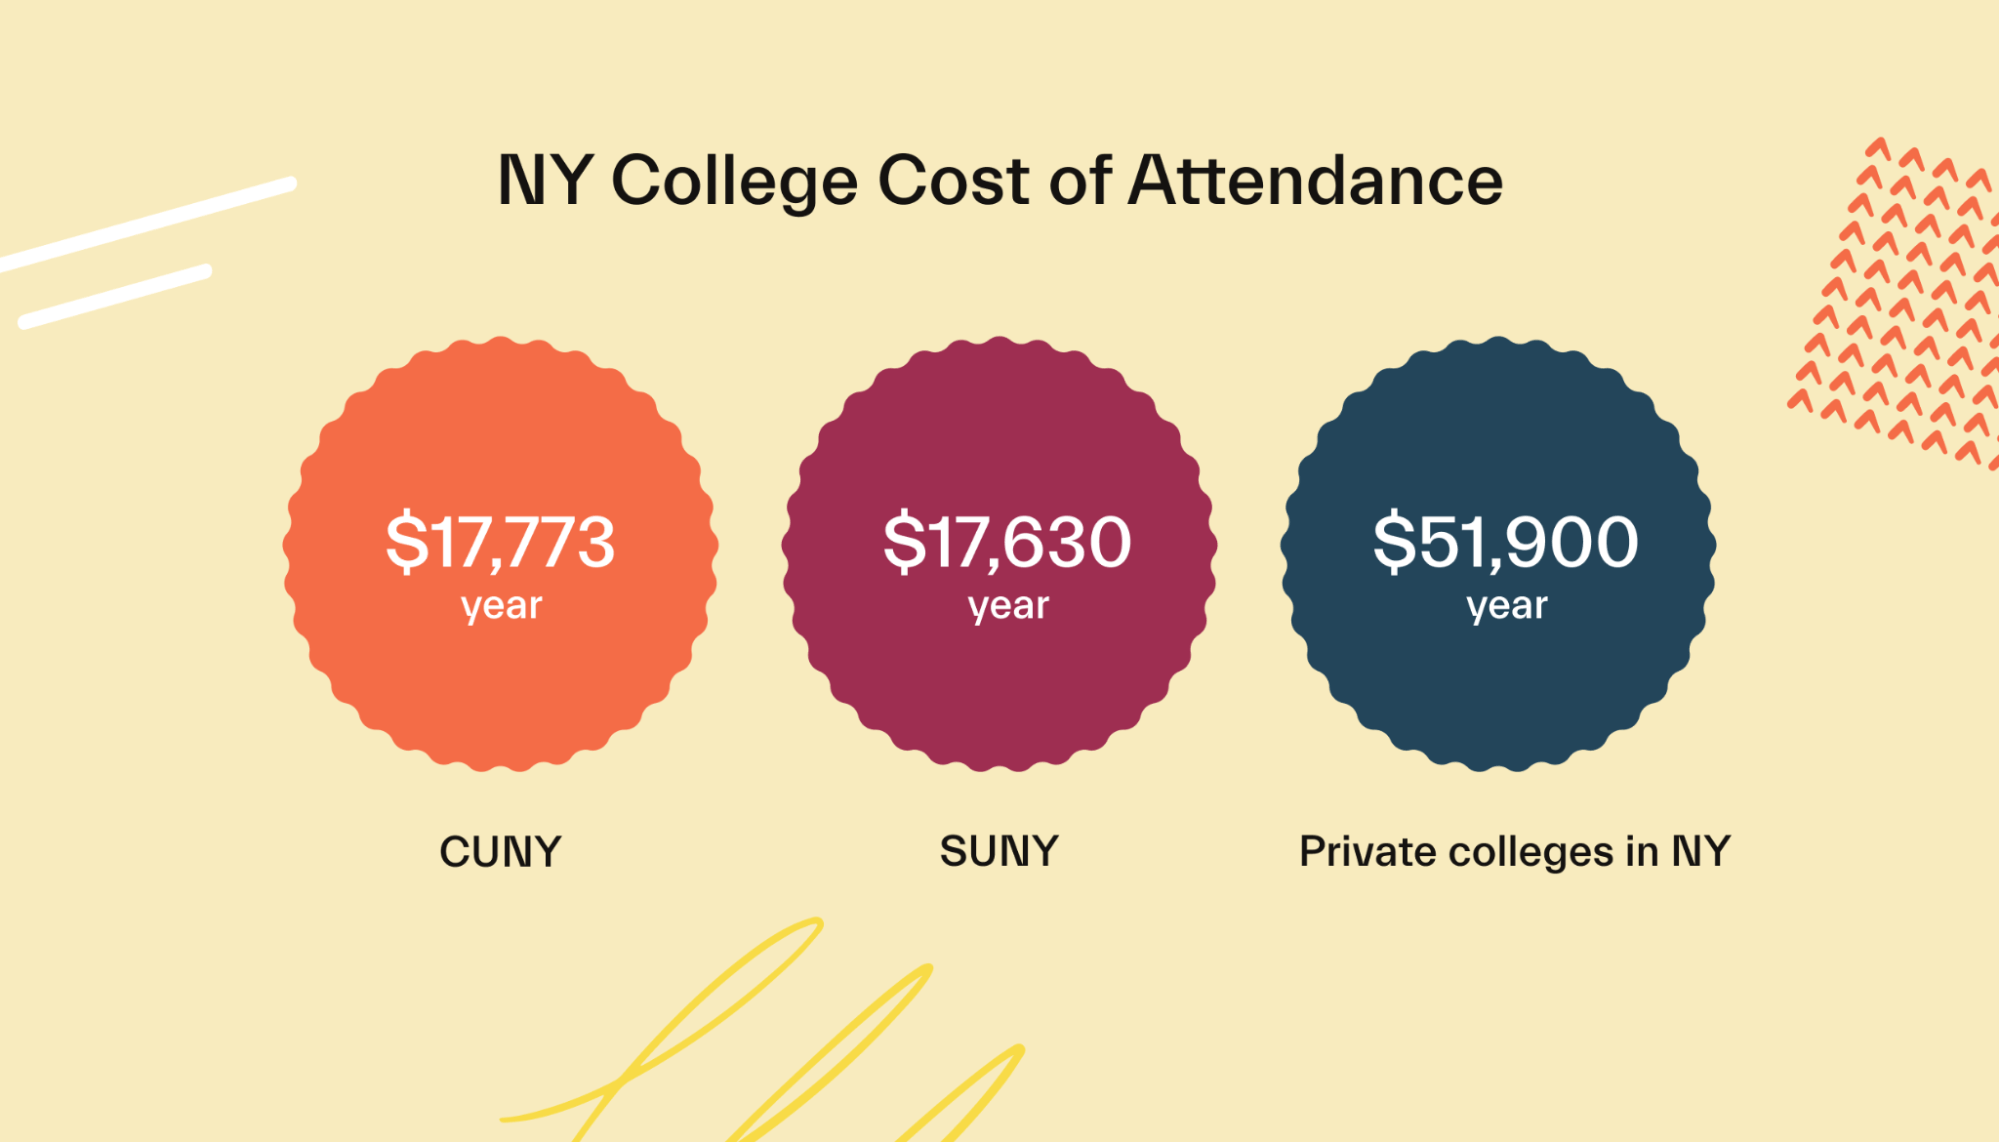 NY College Cost of Attendance